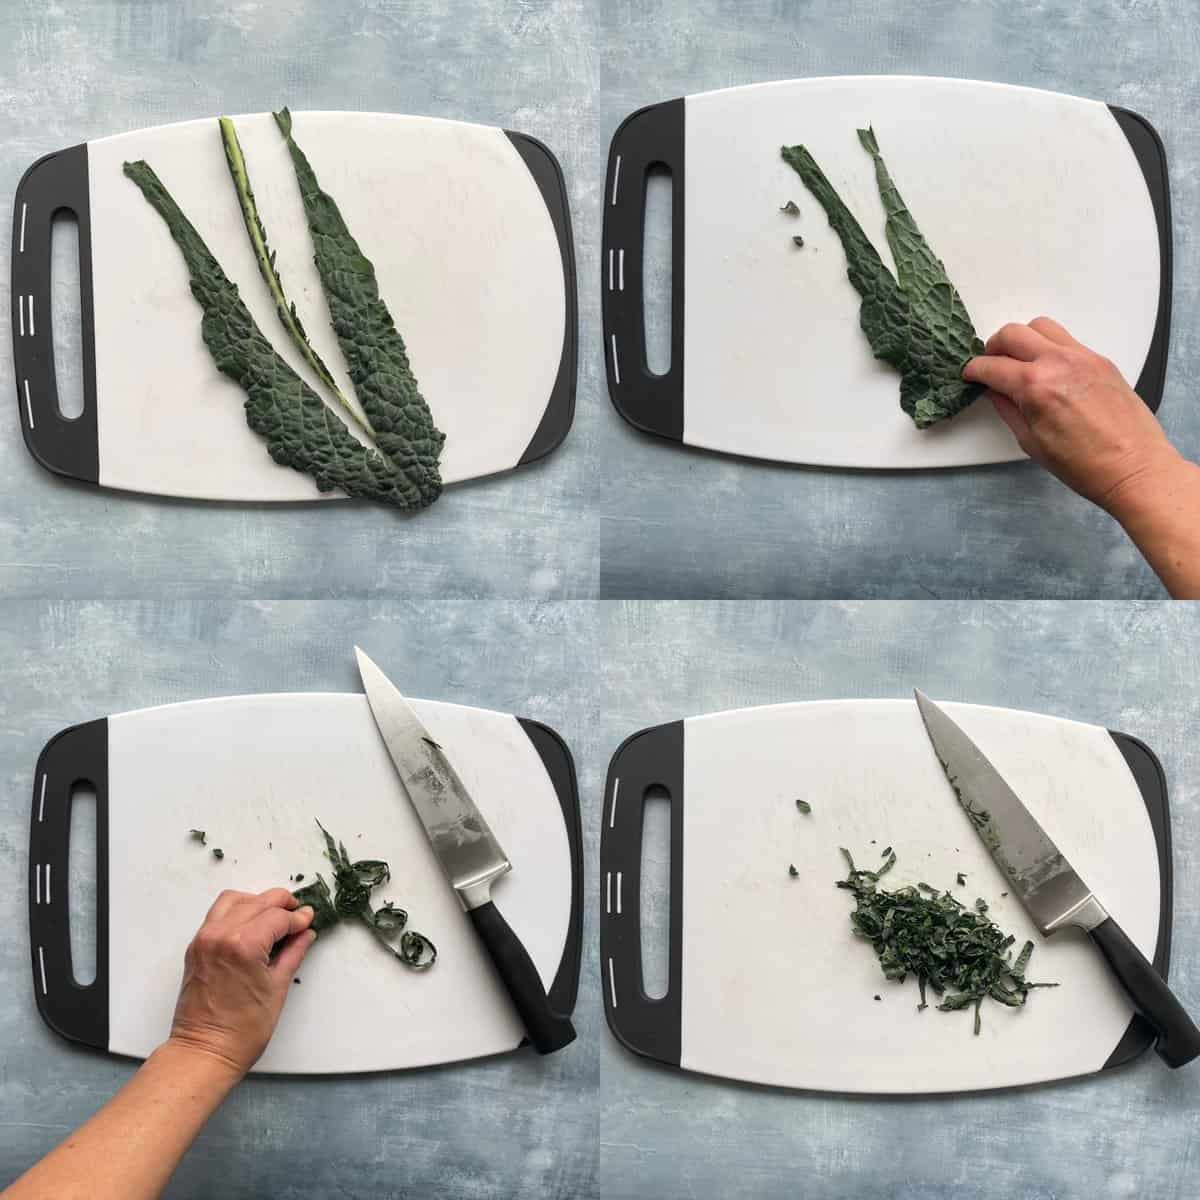 four panels showing how to cut kale.